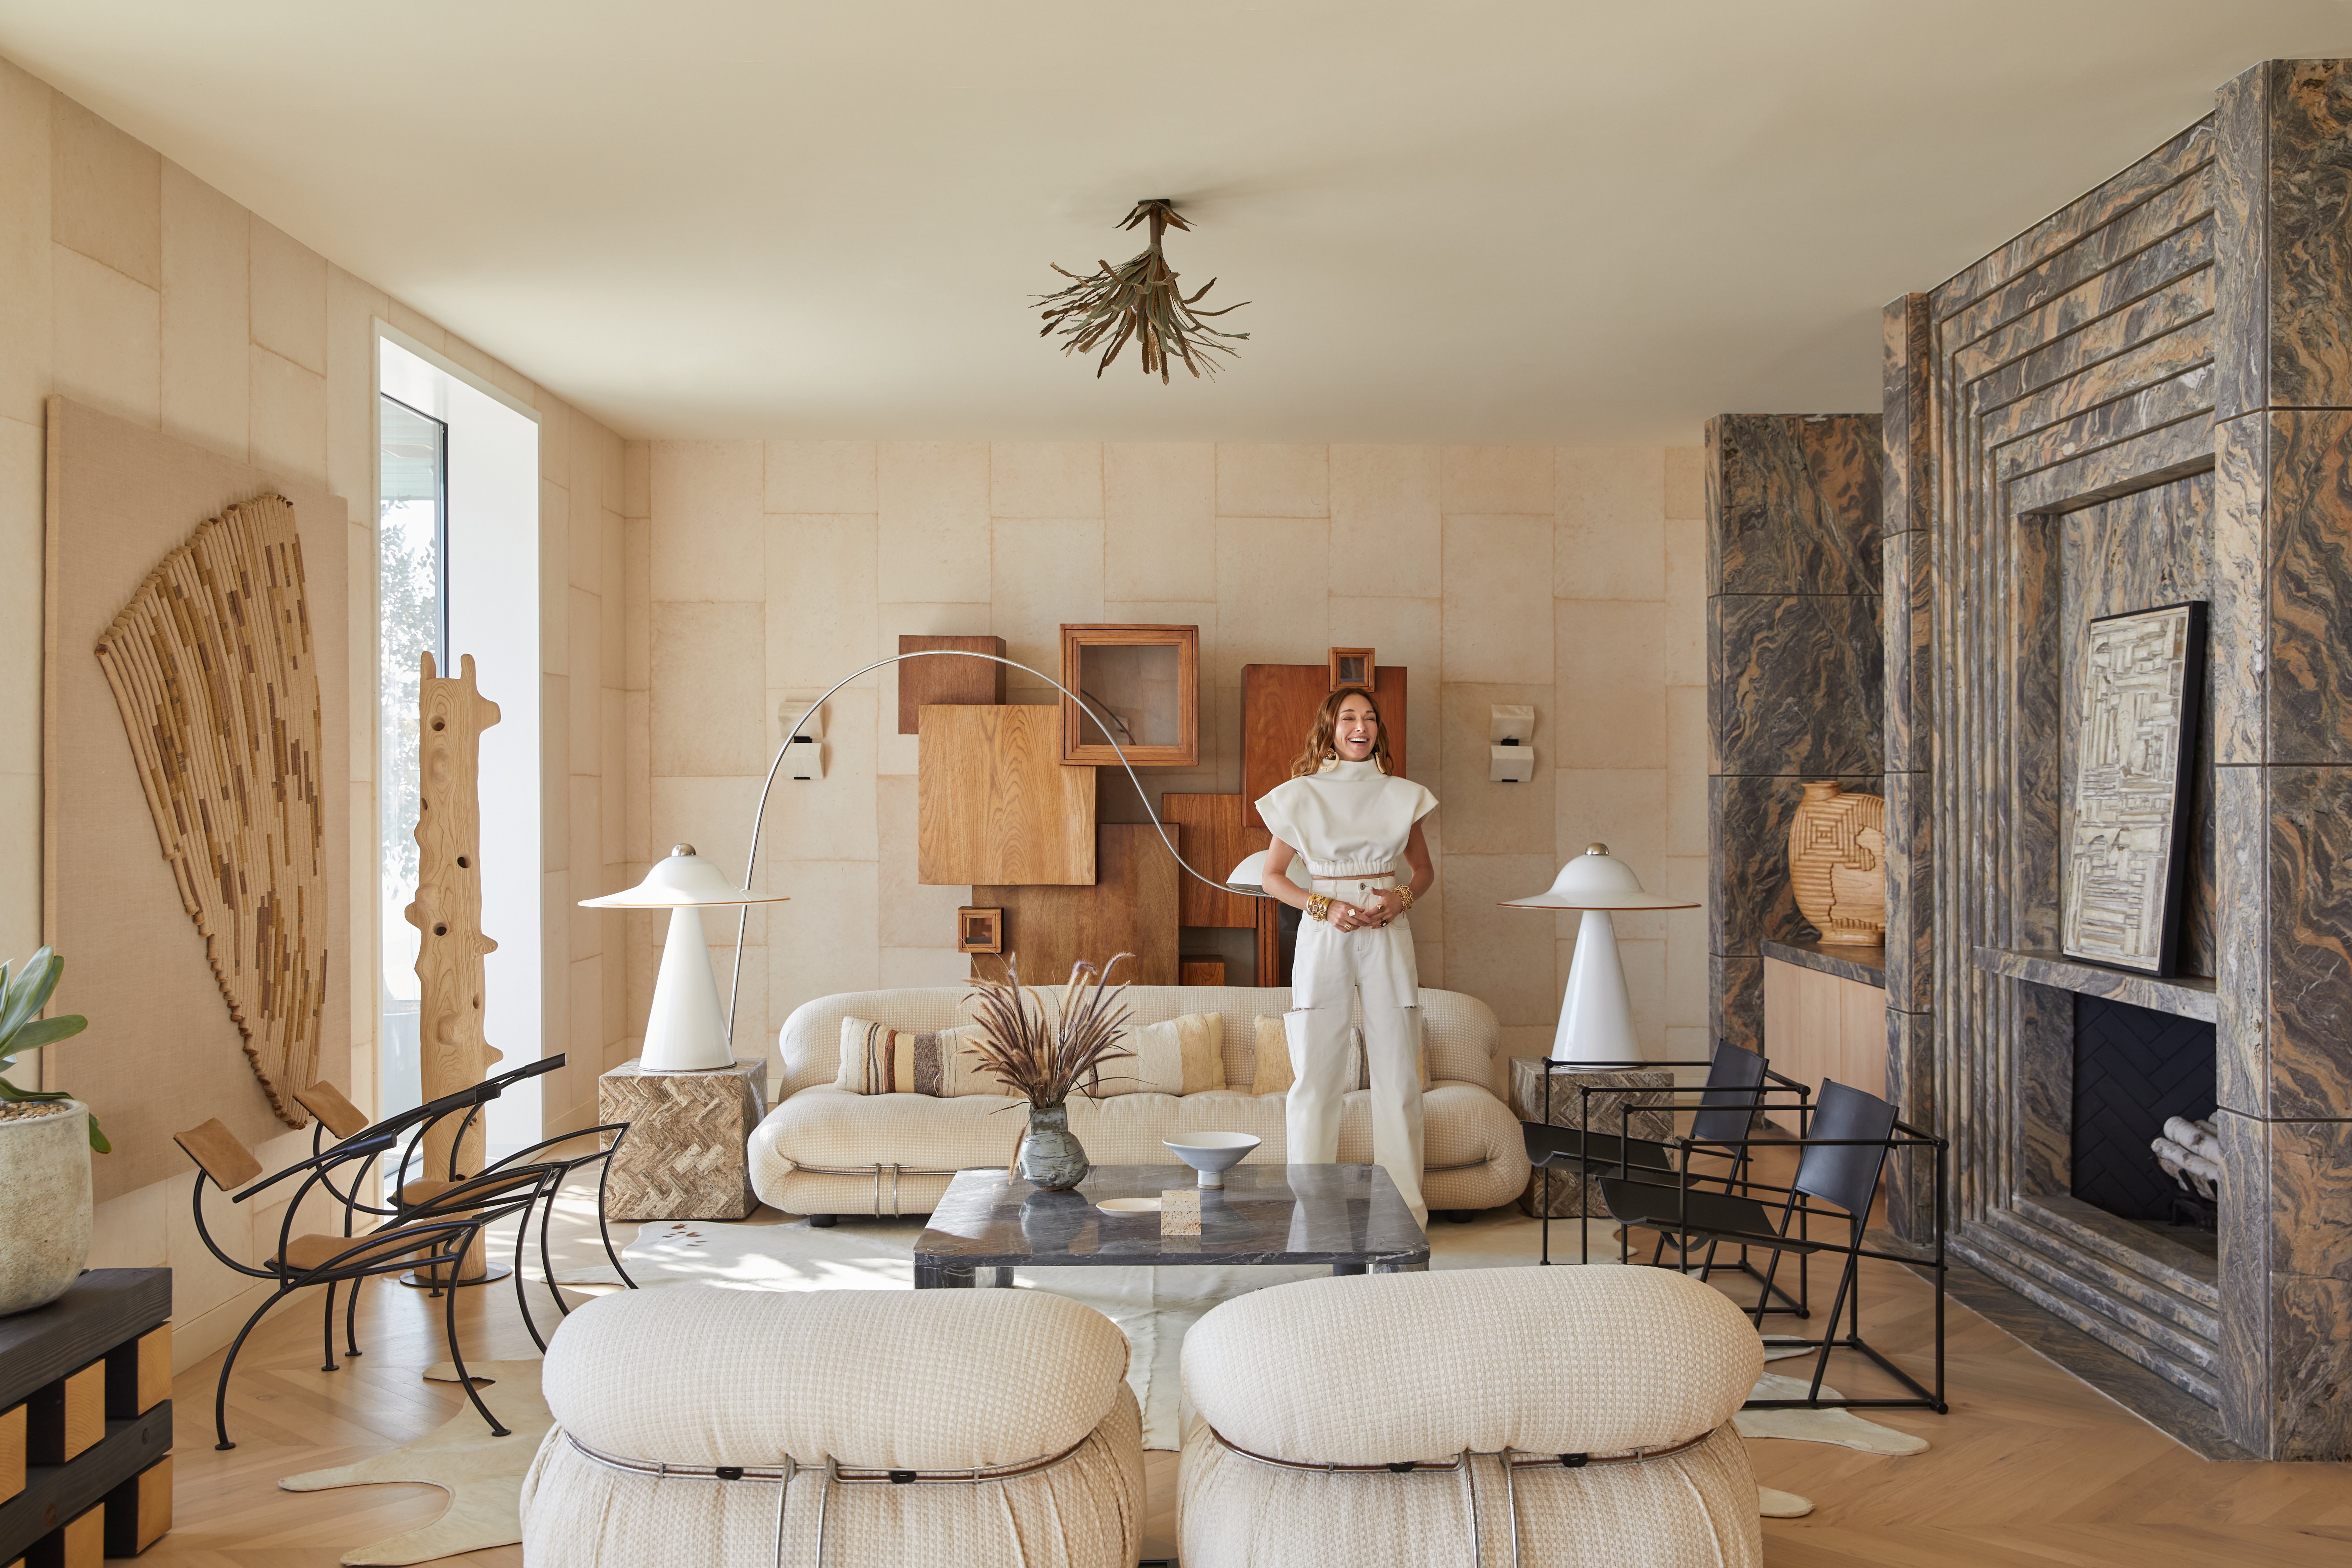 Top Interior Designer Kelly Wearstler on How She Blends Artwork and Design and style to Build Areas You Want to Be In